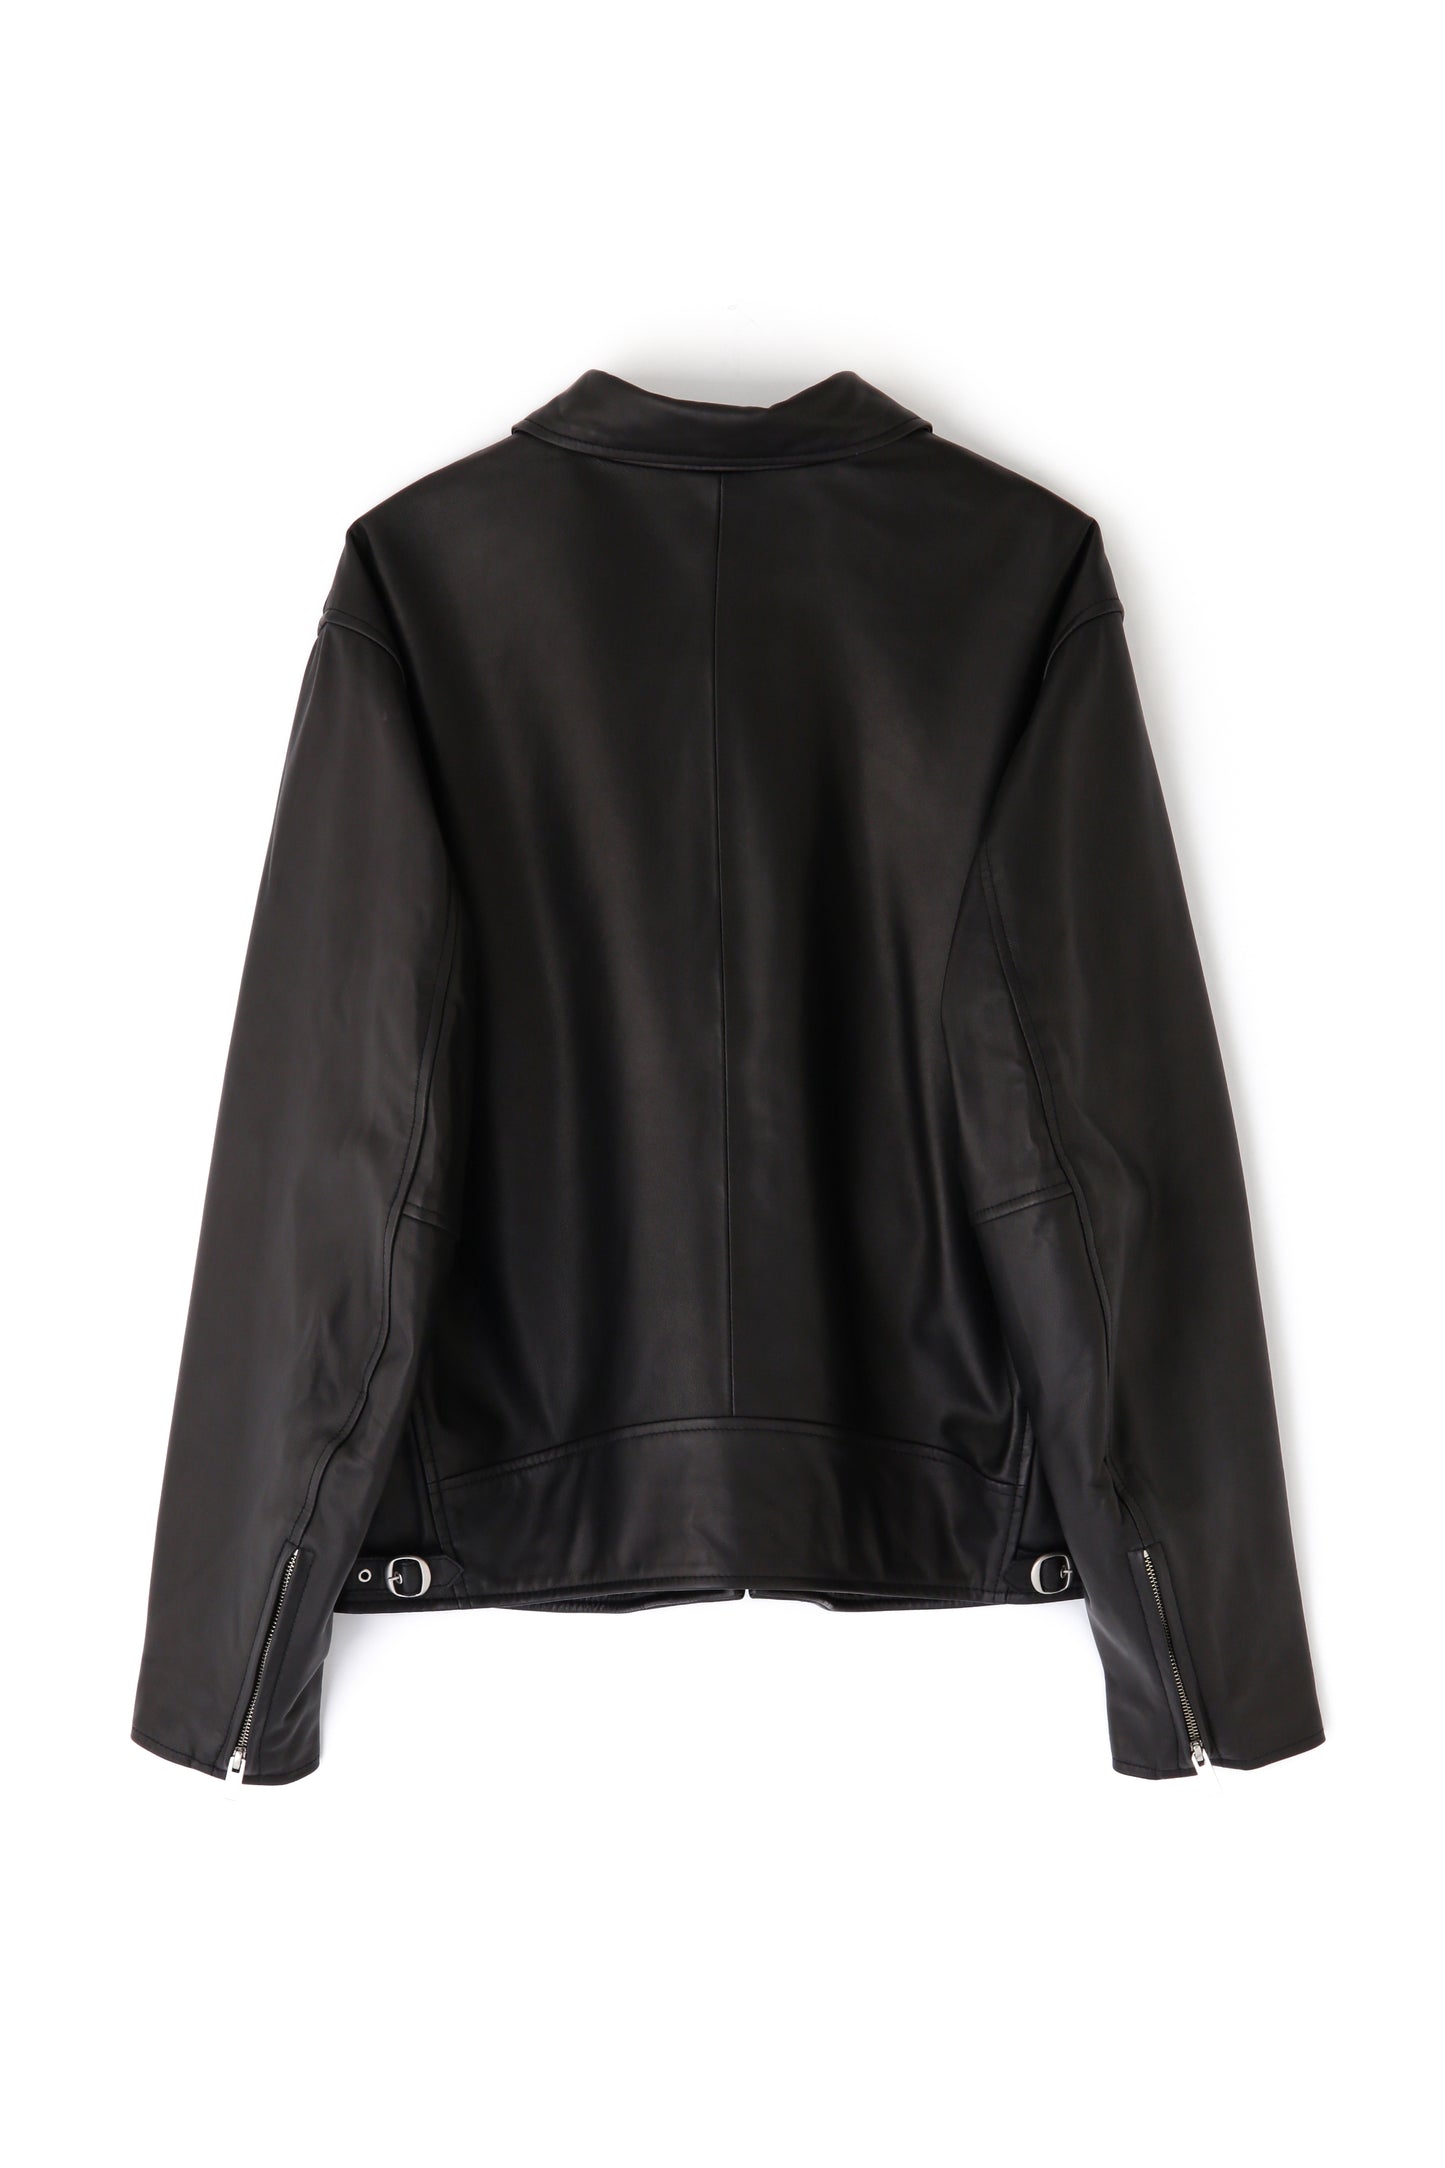 LEATHER RIDER'S JACKET -Sheep leather-